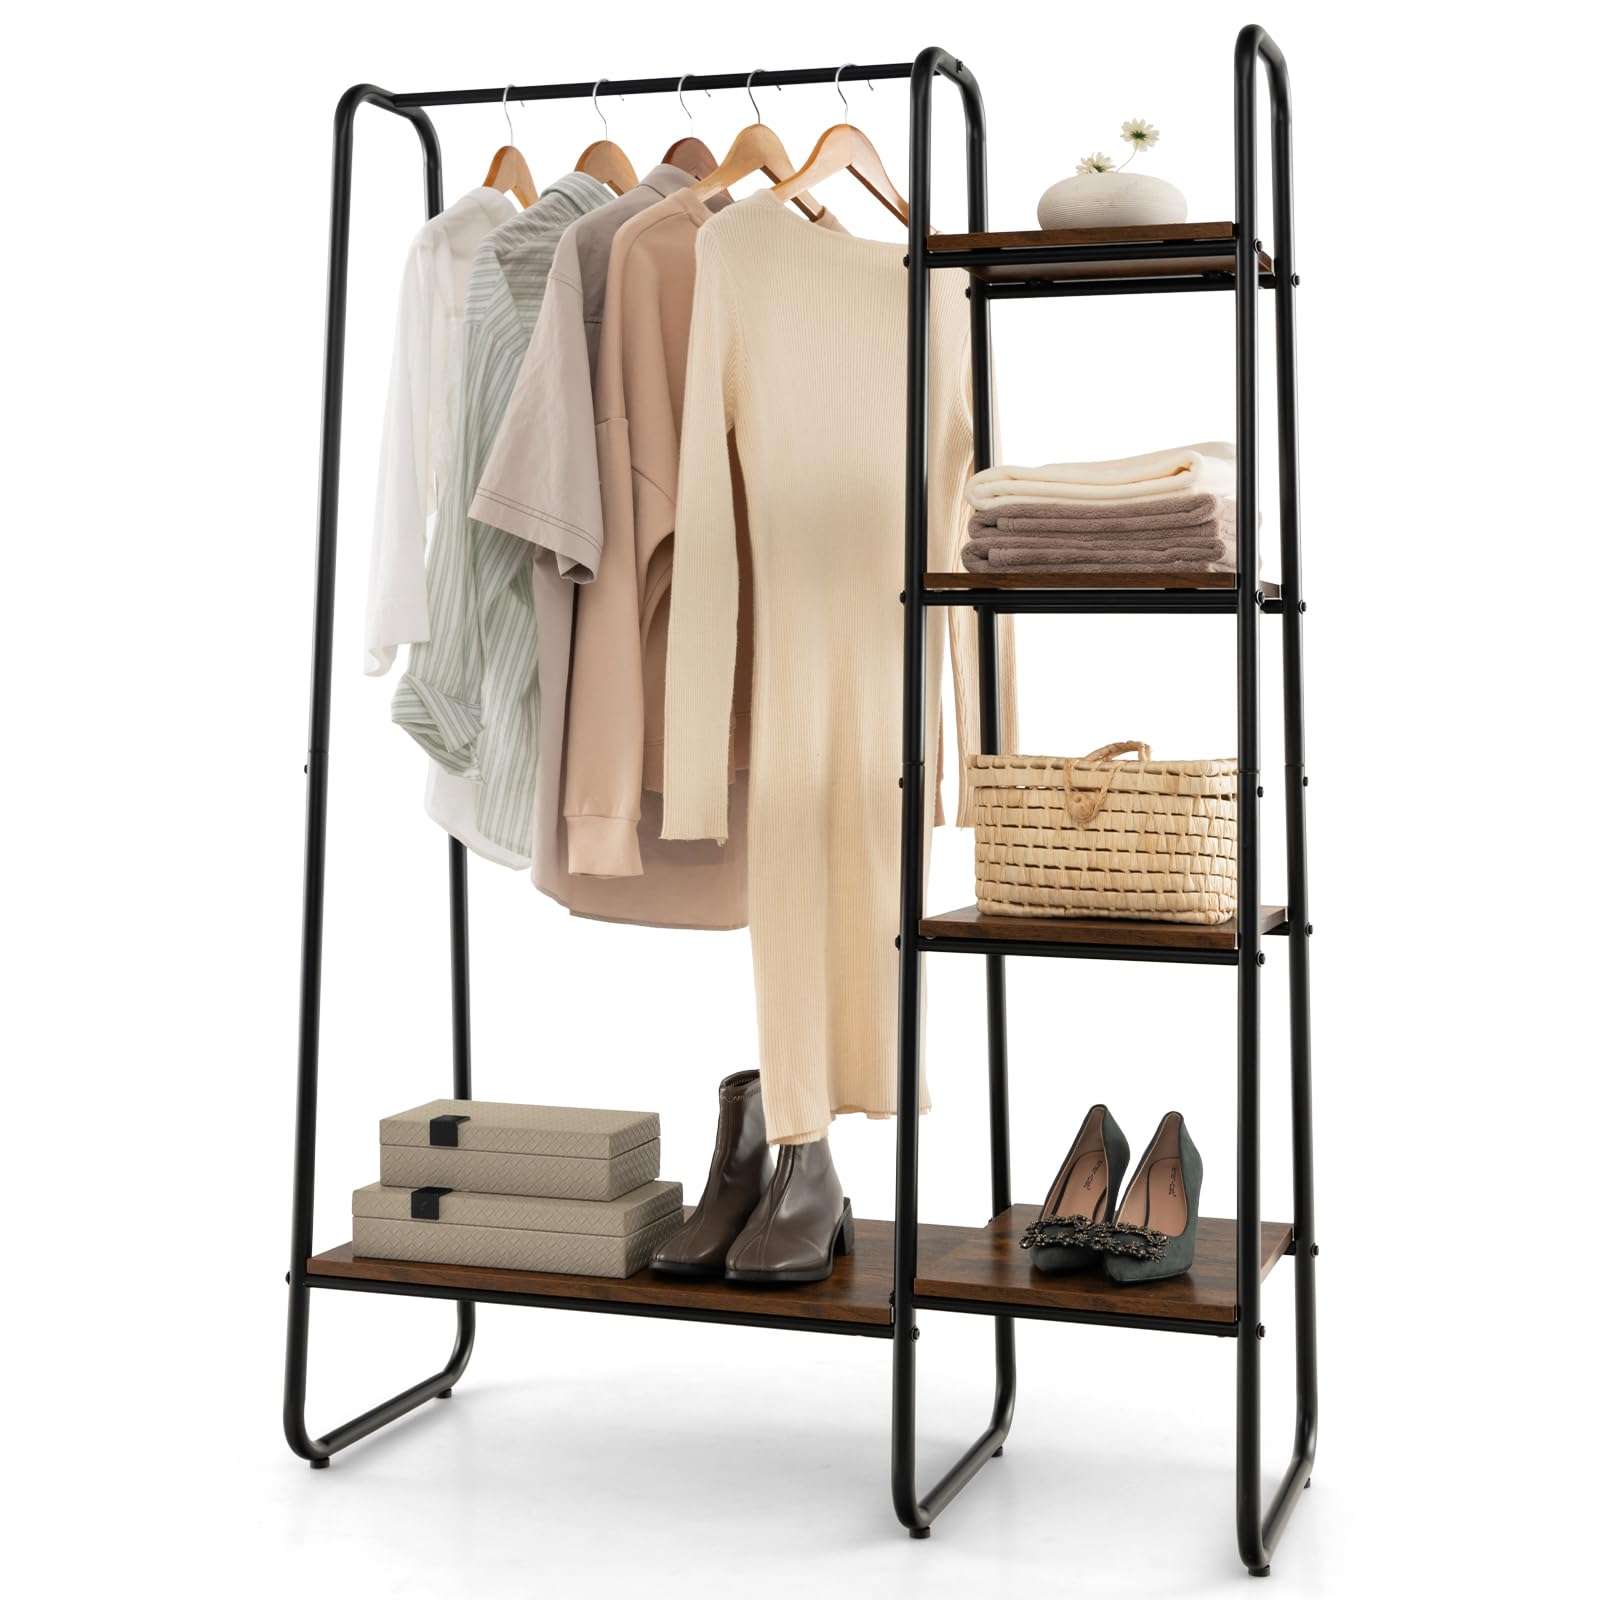 Giantex Clothes Rack with Shelves, Industrial Garment Rack with 5-Tier ...